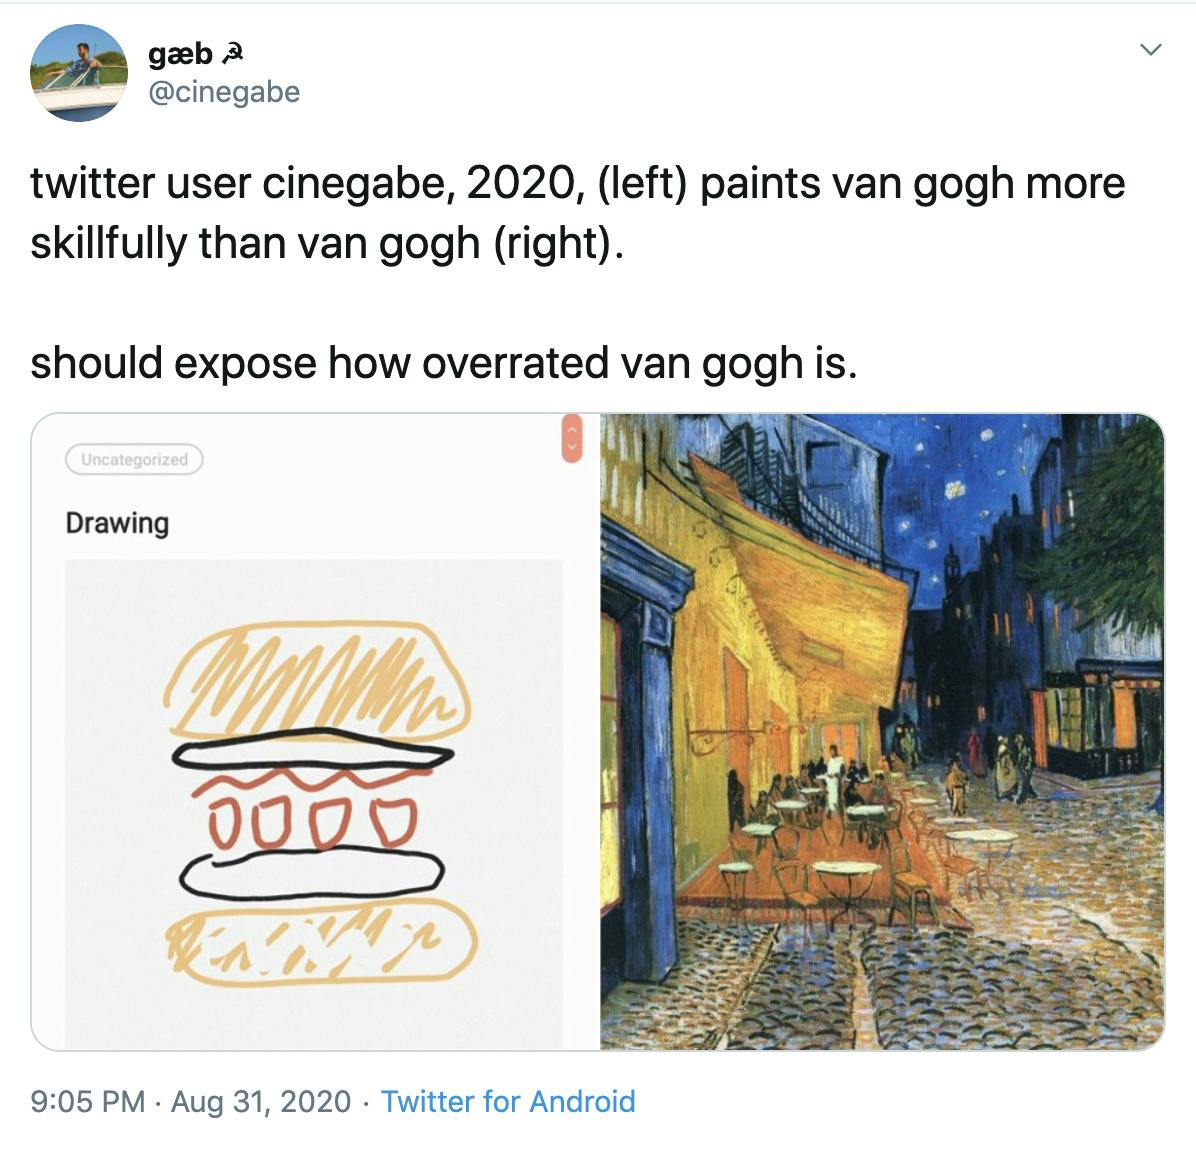 "twitter user cinegabe, 2020, (left) paints van gogh more skillfully than van gogh (right).  should expose how overrated van gogh is." scribbled drawing of a burger next to the Van Gogh from the original tweet